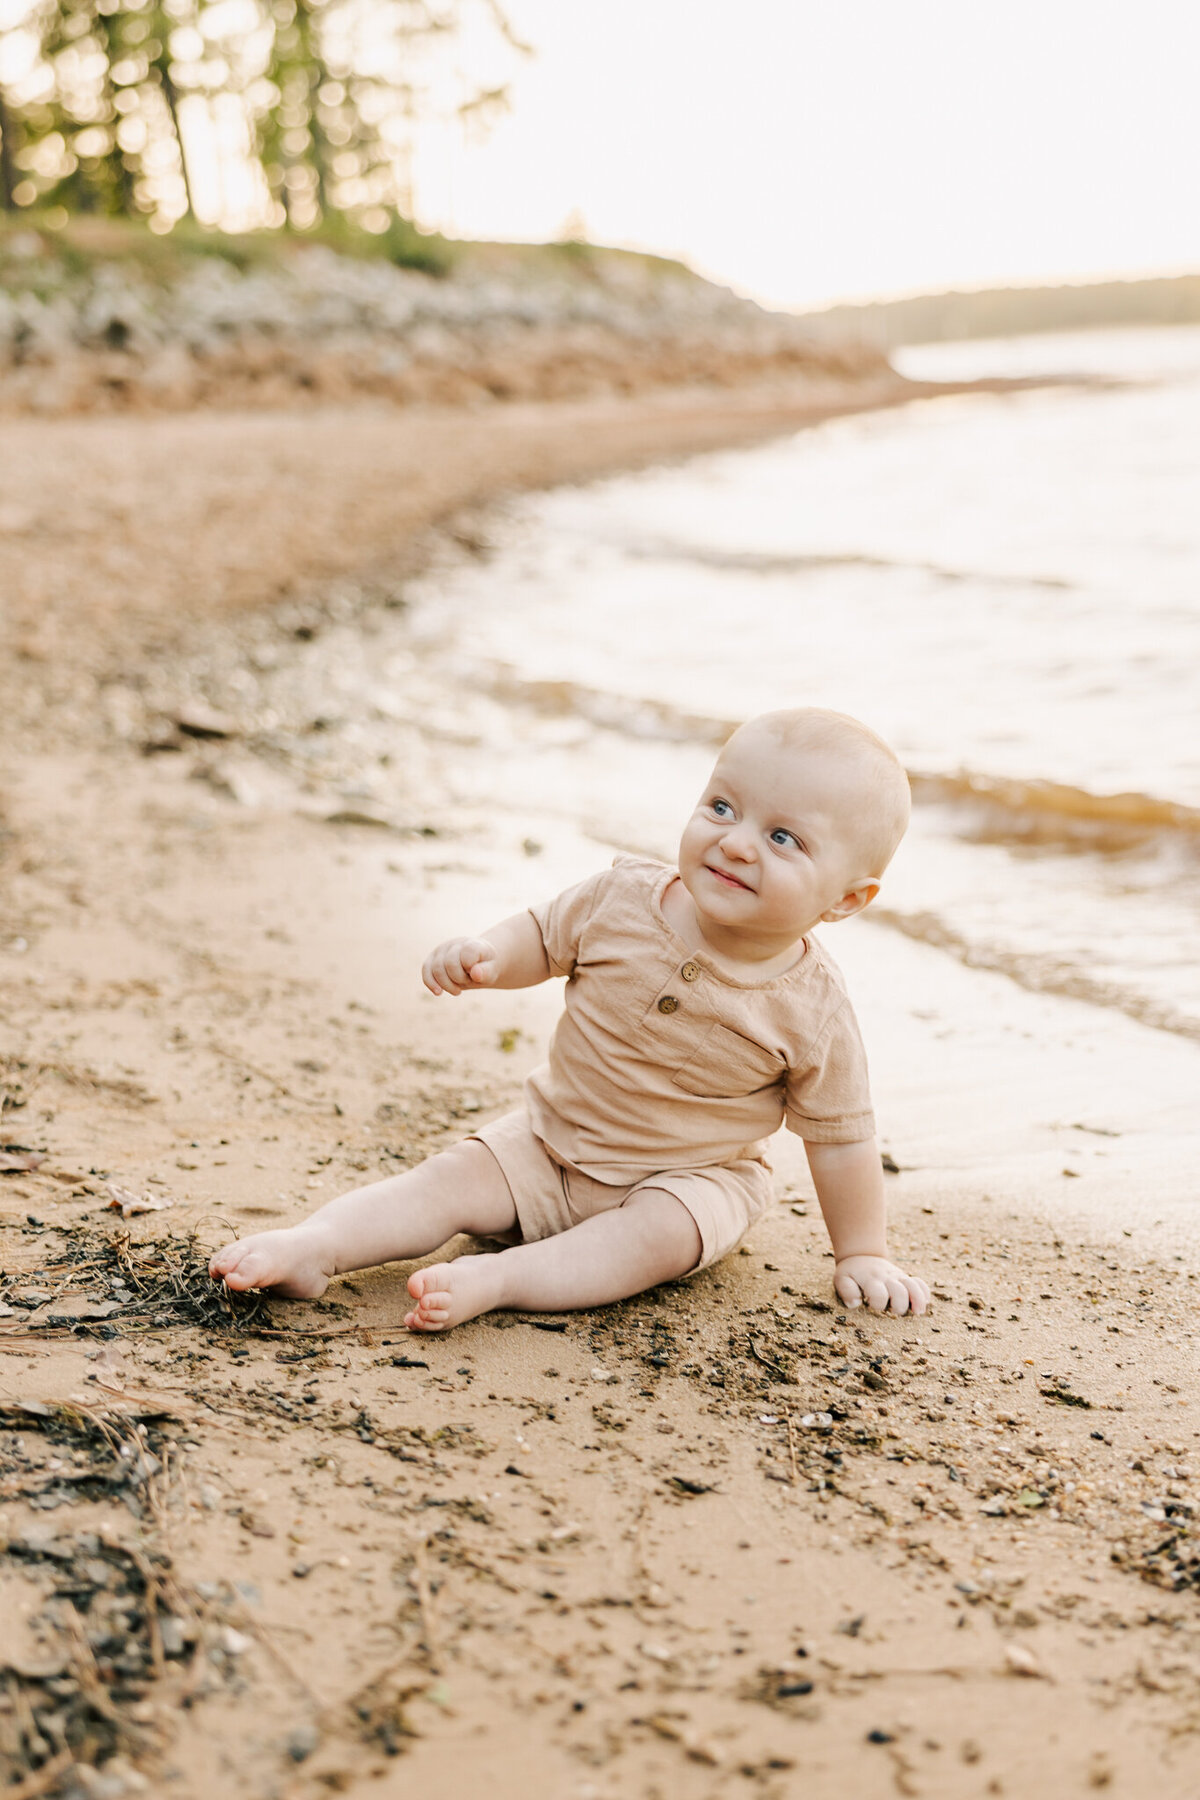 Baby boy sitting in the sand playing with the mud